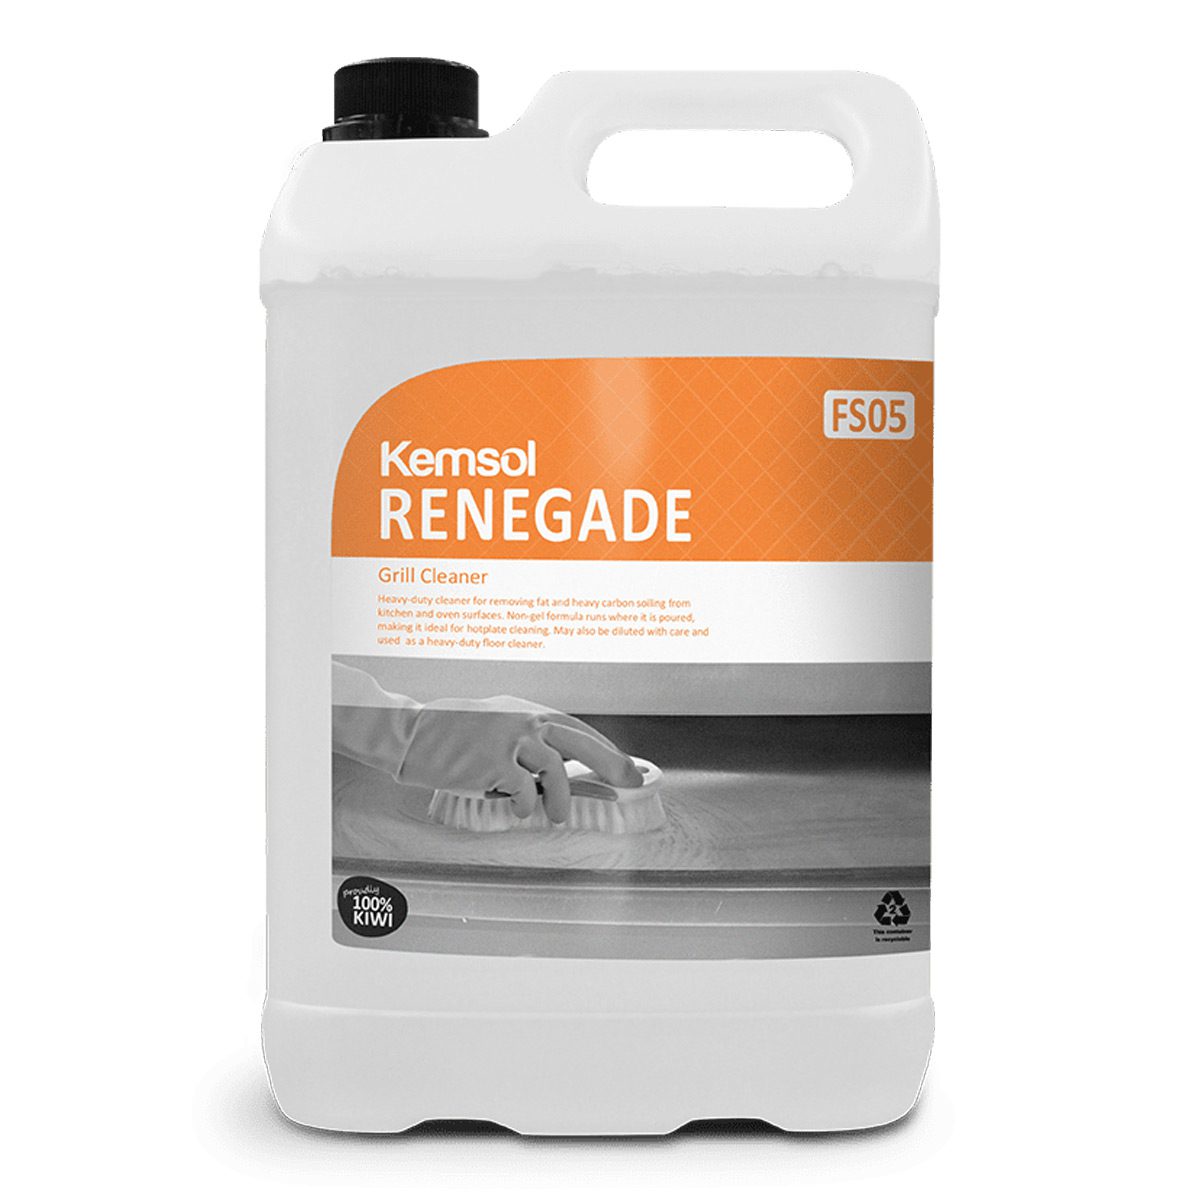 cleaning-products-kitchen-multipurpose-kemsol-renegade-pro-grill-amd-oven-cleaner-5L-litre-heavy-duty-cleaner-removing-fat-heavy-carbon-soiling-non-gel-formula-vjs-distributors-KRENE